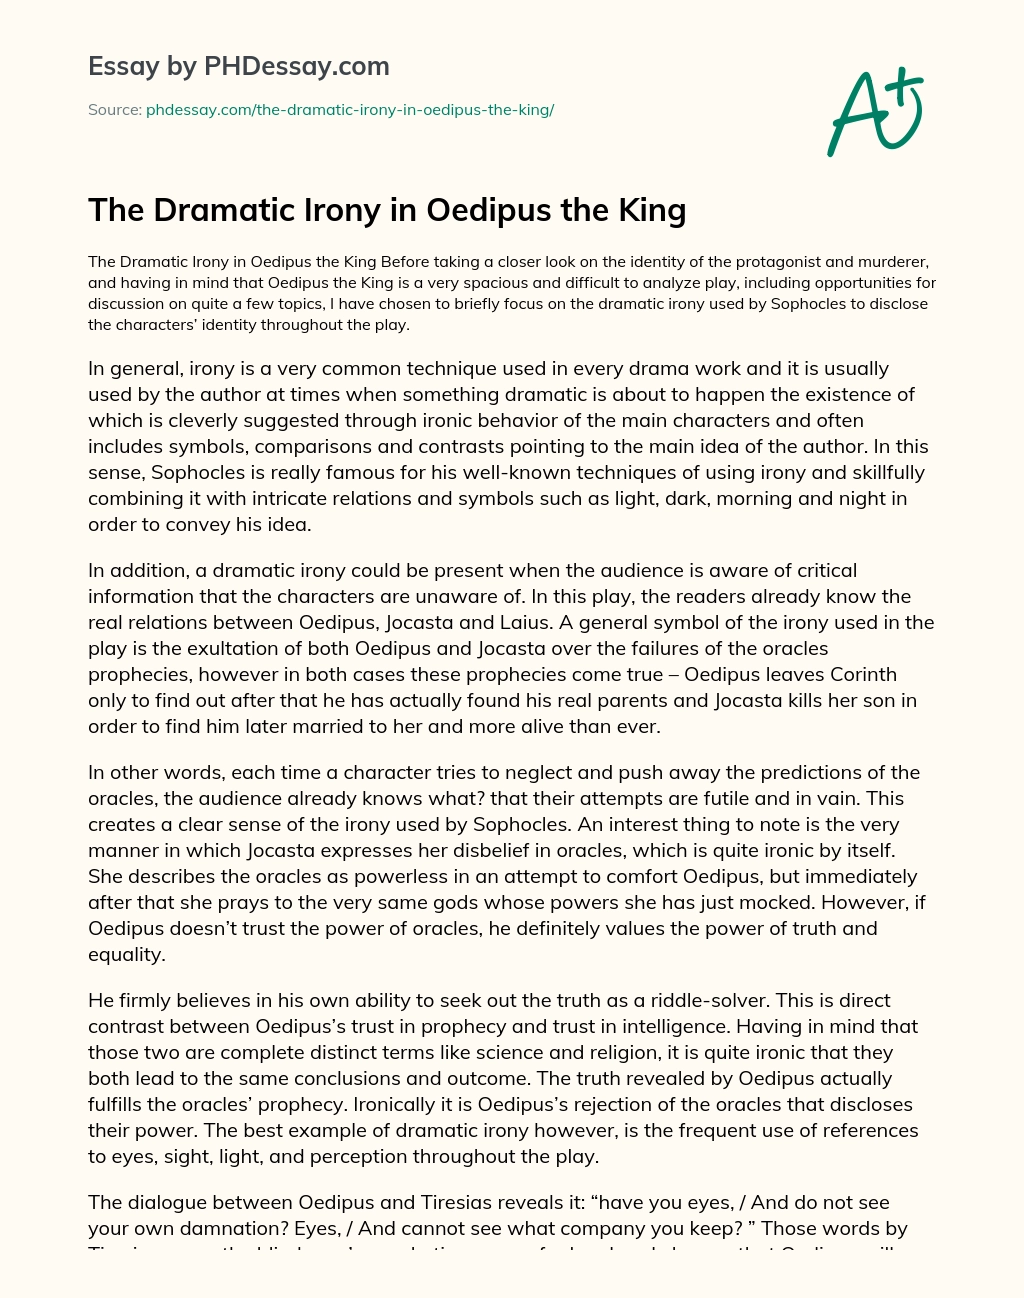 The Dramatic Irony in Oedipus the King essay